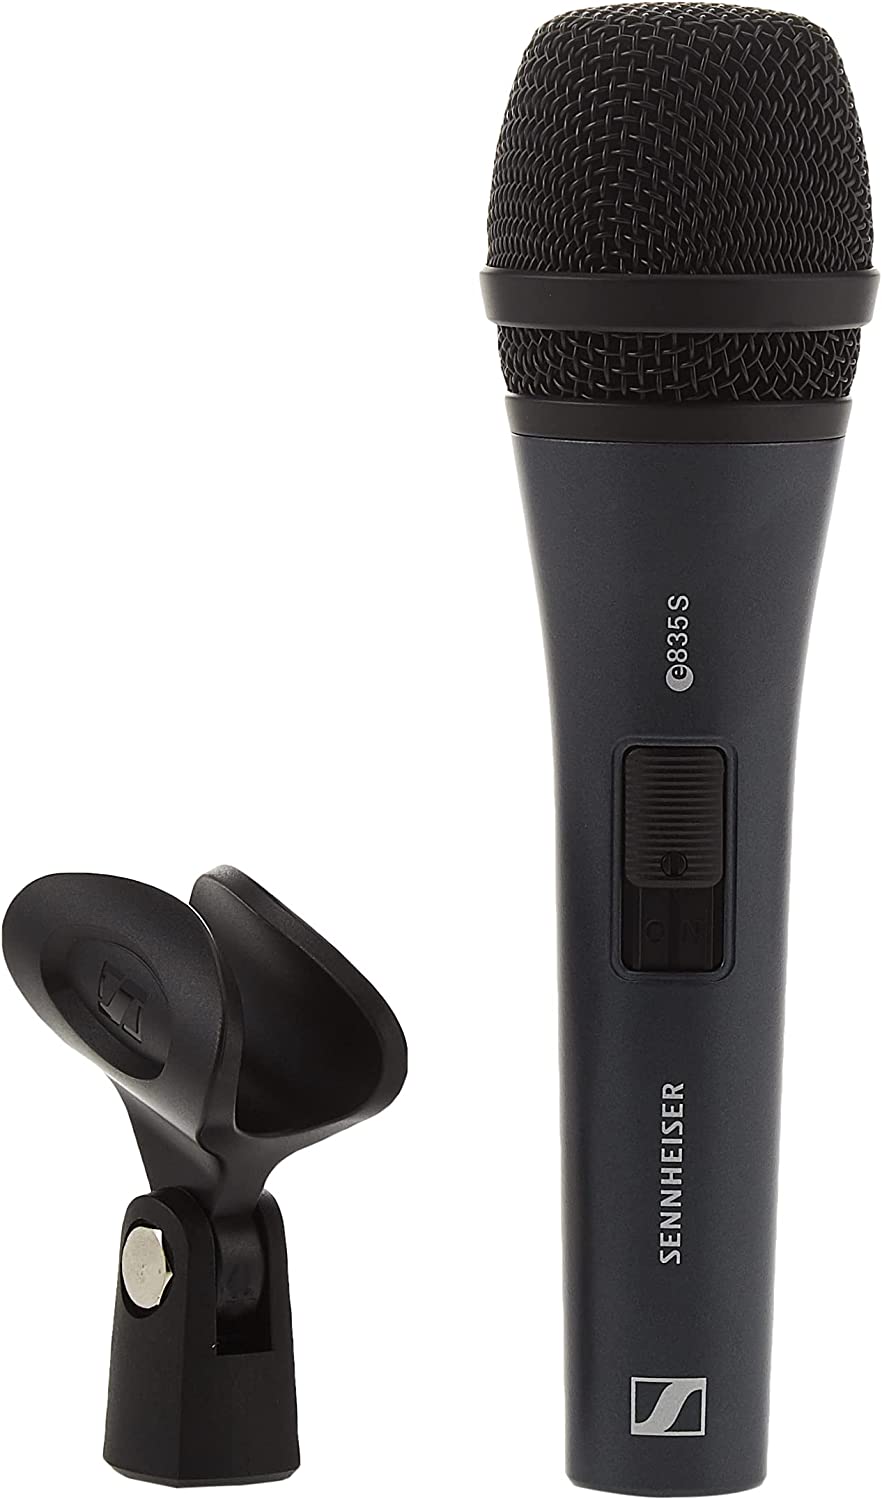 Sennheiser Professional E 835-S Dynamic Cardioid Vocal Microphone with On/Off Switch